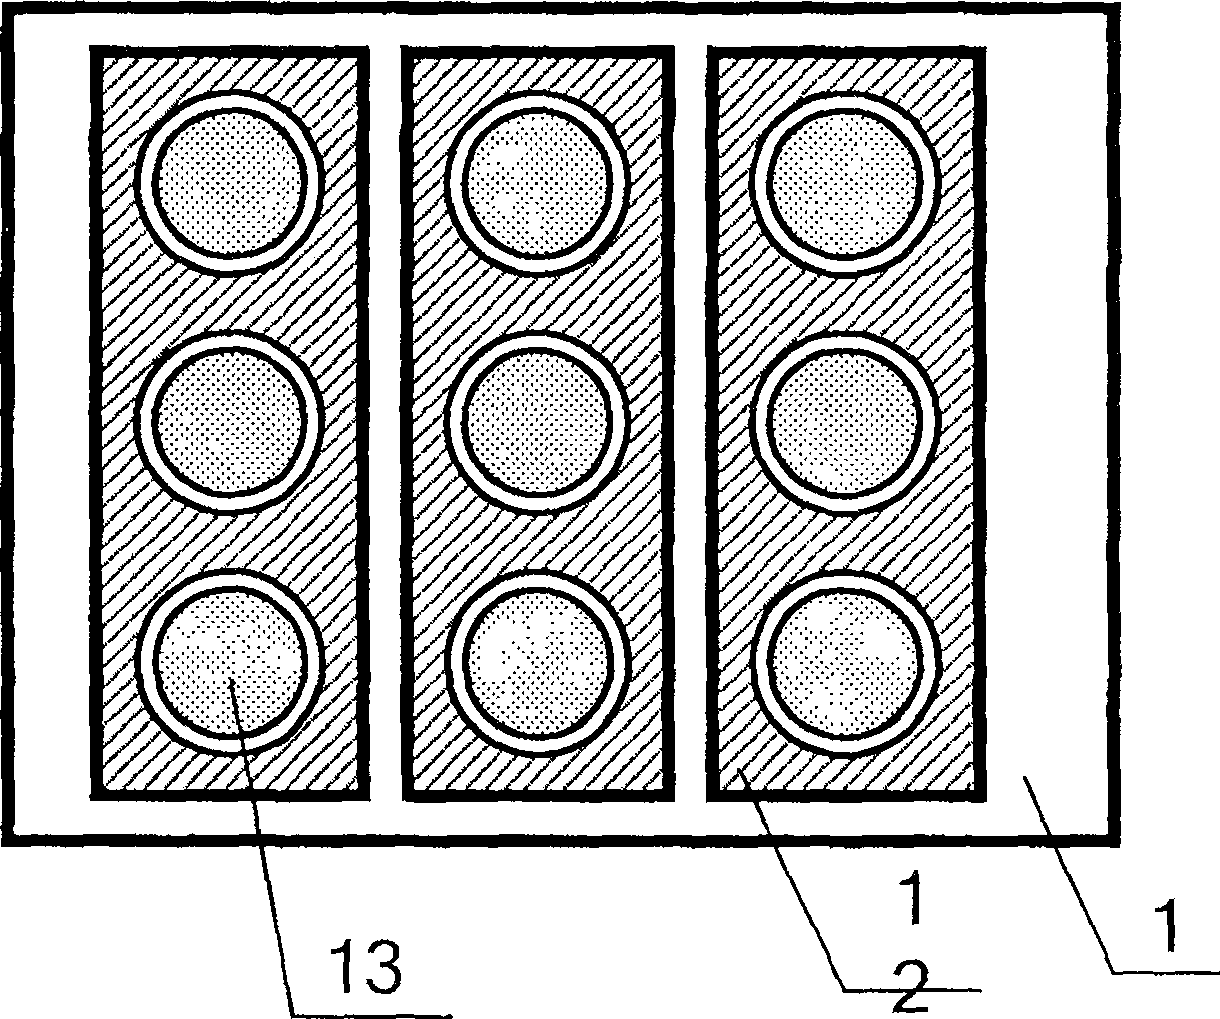 Flat-panel display device with circular cross-angle lower gate-modulated cathode structure and its preparing process